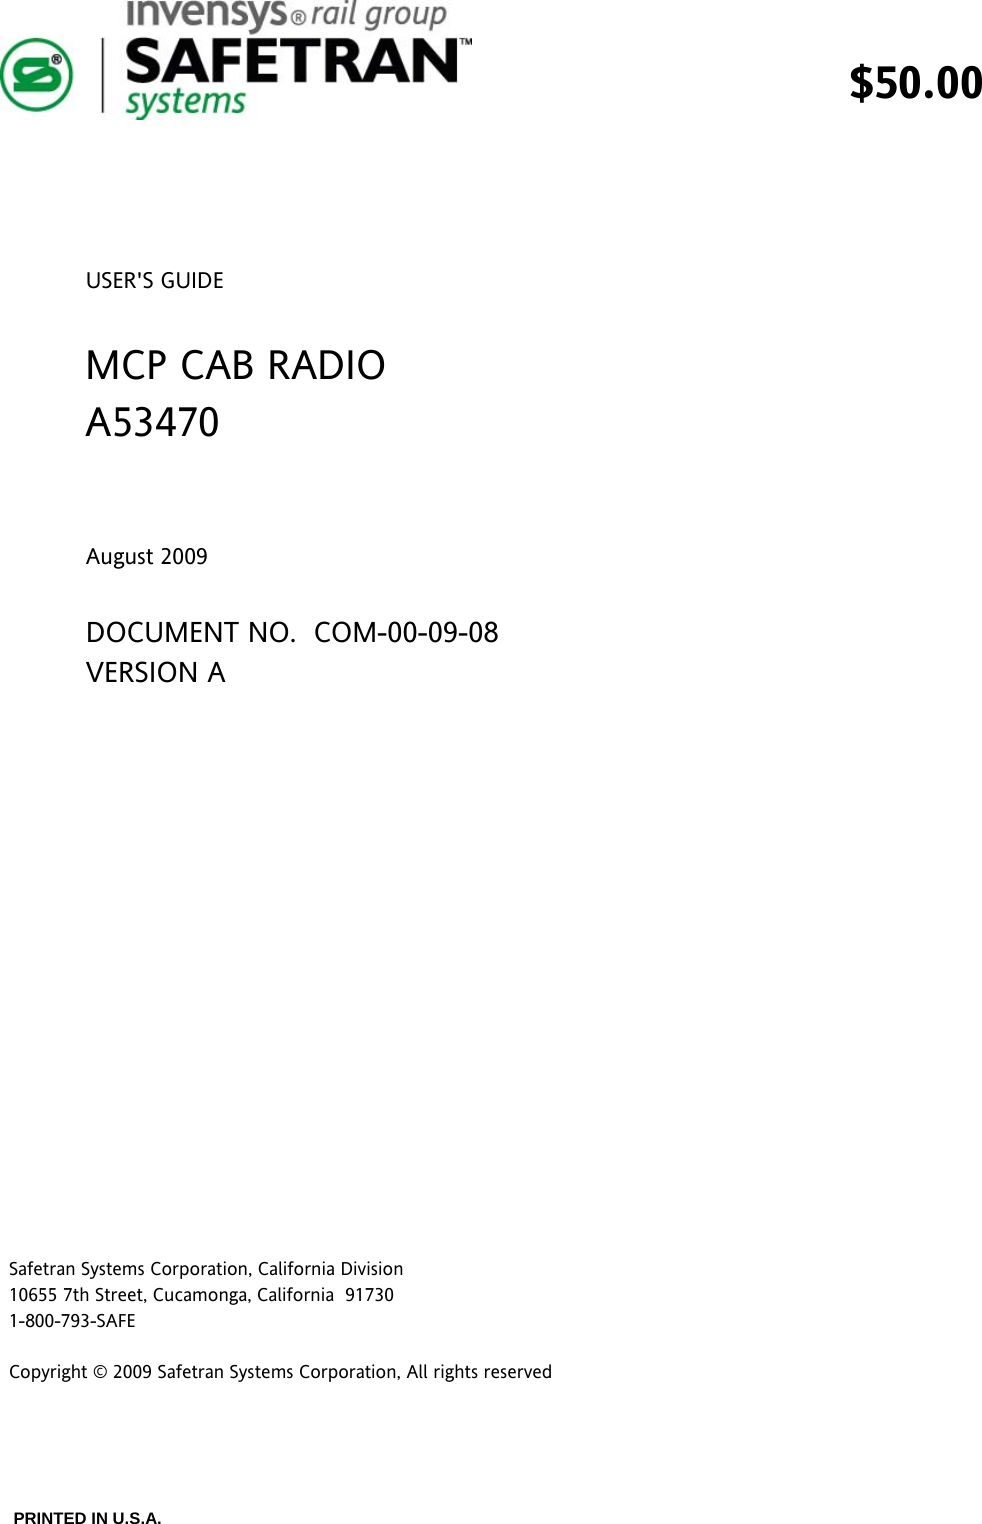  $50.00   PRINTED IN U.S.A.     USER&apos;S GUIDE  MCP CAB RADIO  A53470   August 2009  DOCUMENT NO.  COM-00-09-08 VERSION A                   Safetran Systems Corporation, California Division 10655 7th Street, Cucamonga, California  91730 1-800-793-SAFE  Copyright © 2009 Safetran Systems Corporation, All rights reserved  